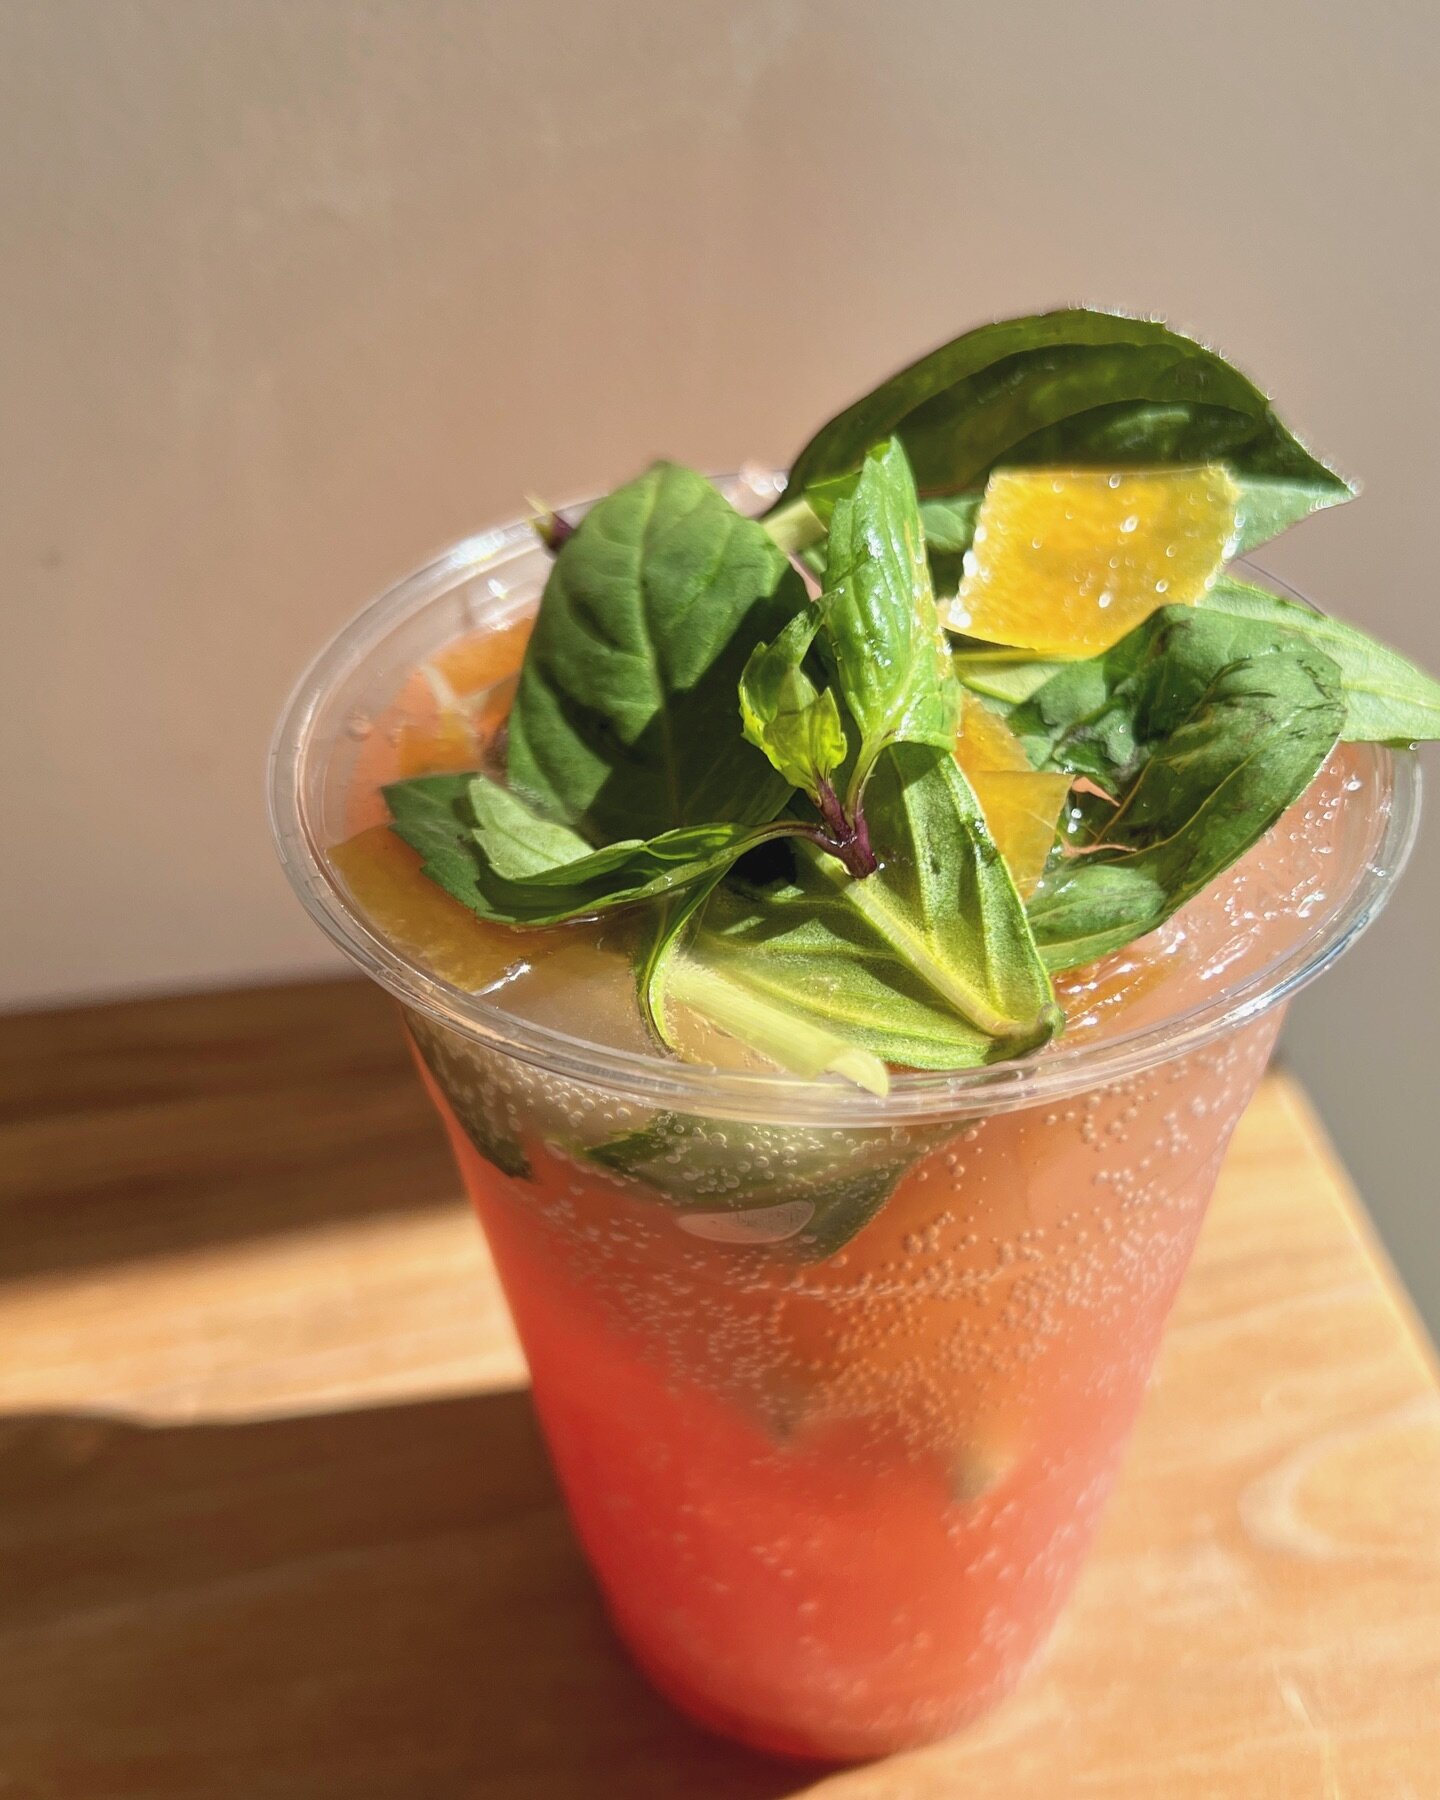 Happy Sunday Breadbelly Fam 🙂💚
3-day weekends are the best.

🤳: Grapefruit Fizz! 
Freshly squeezed grapefruit juice, muddled lemongrass, Thai basil, &amp; preserved grapefruit peel. Topped with ginger beer 🤌🍊🍹🌴